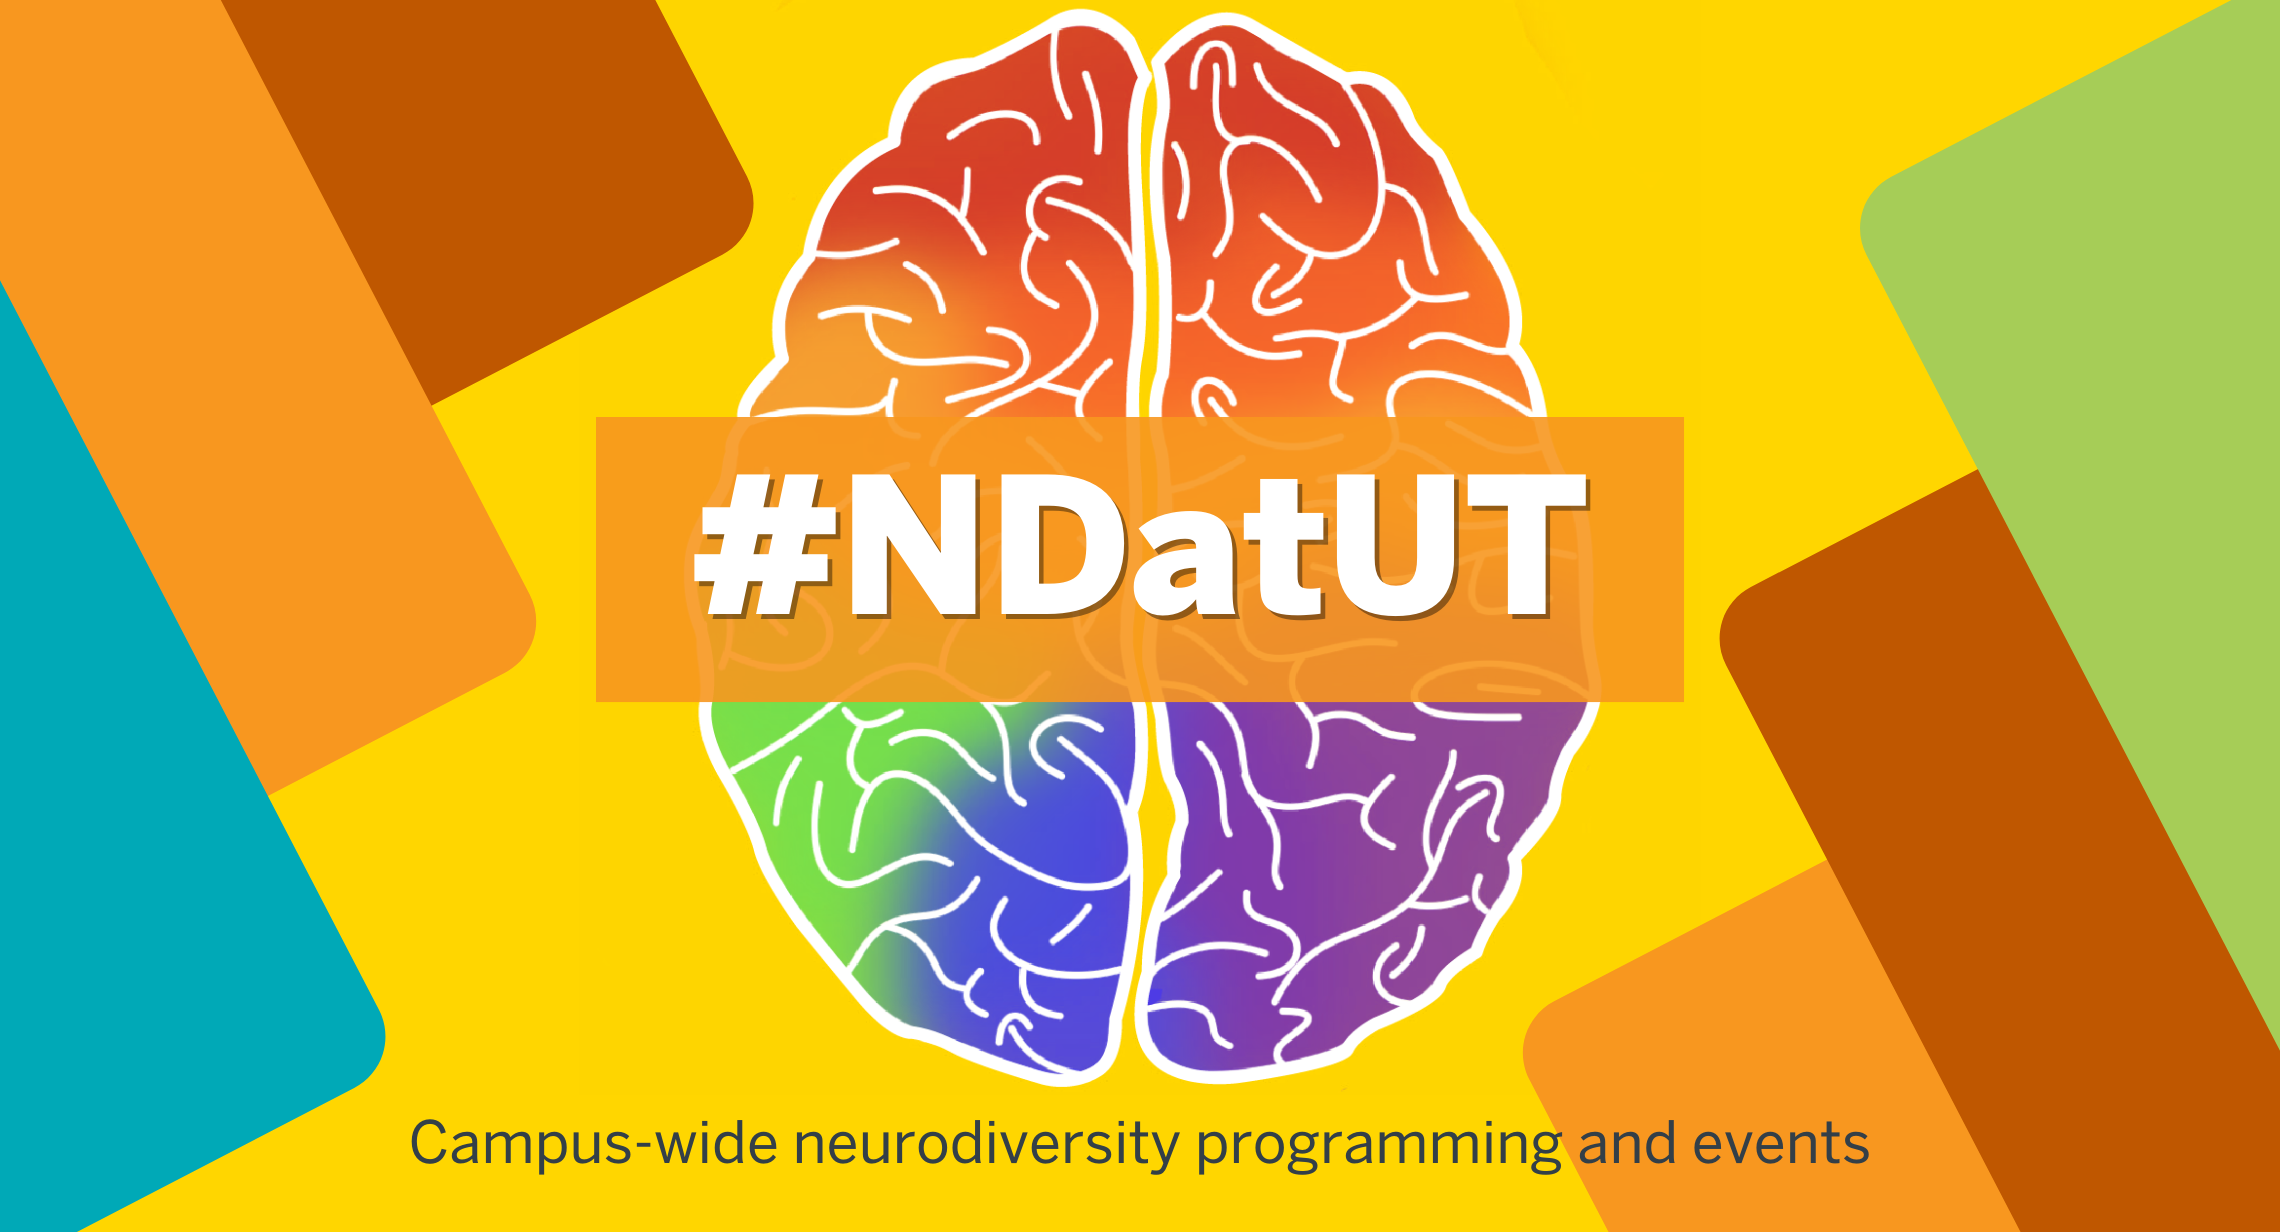 Rainbow Brain Logo with #NDatUT Text Written Across It. Underneath, it has text written out saying "Campus-wide neurodiversity programming and events"